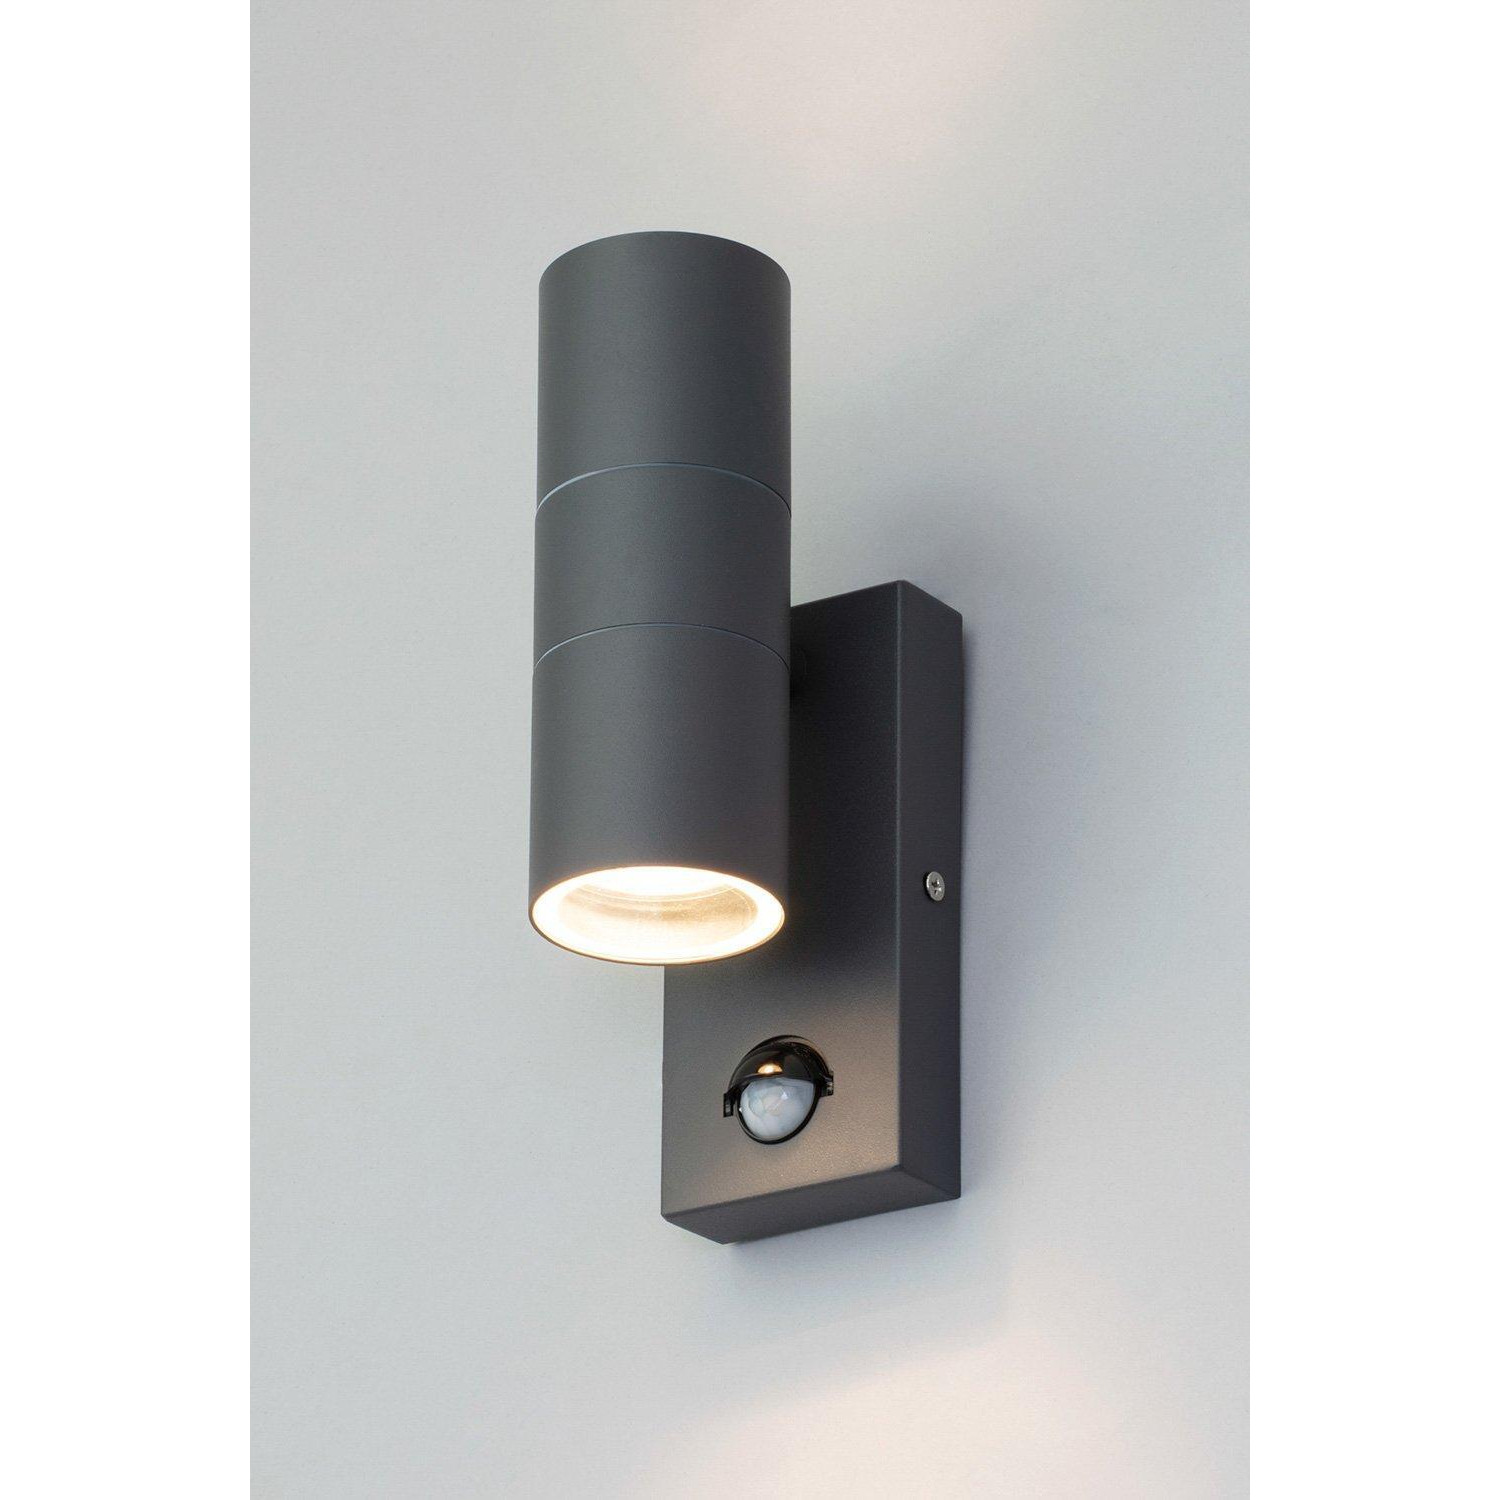 Jared Outdoor Wall Light with Sensor - image 1